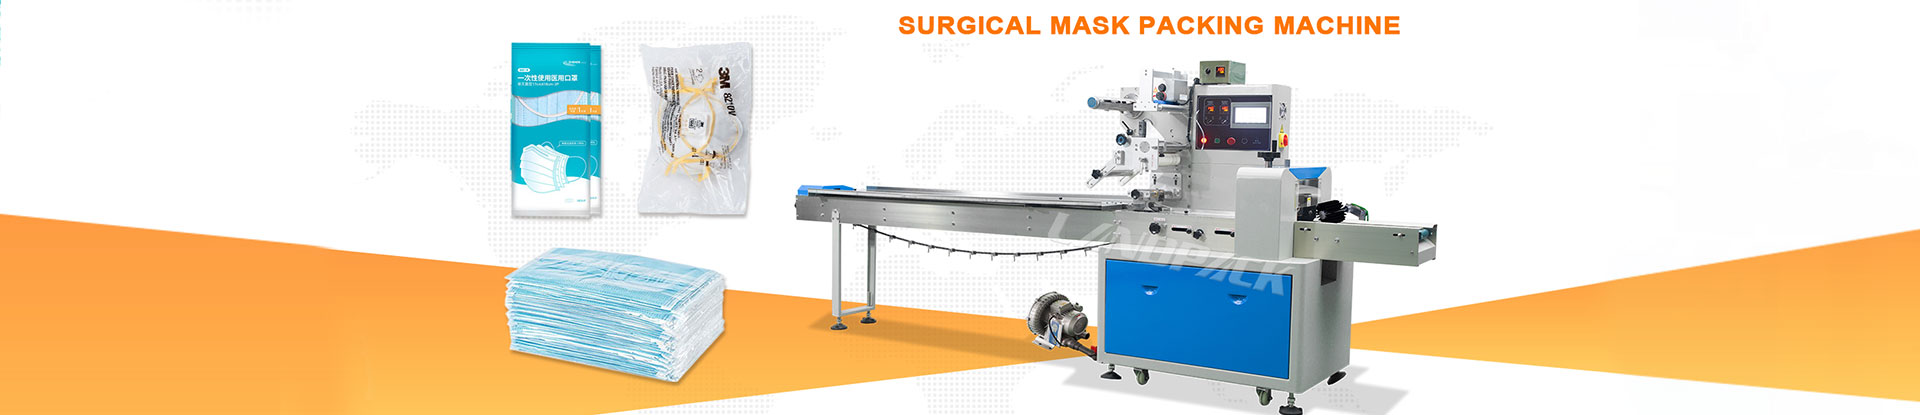 Surgical Mask Packing Machine